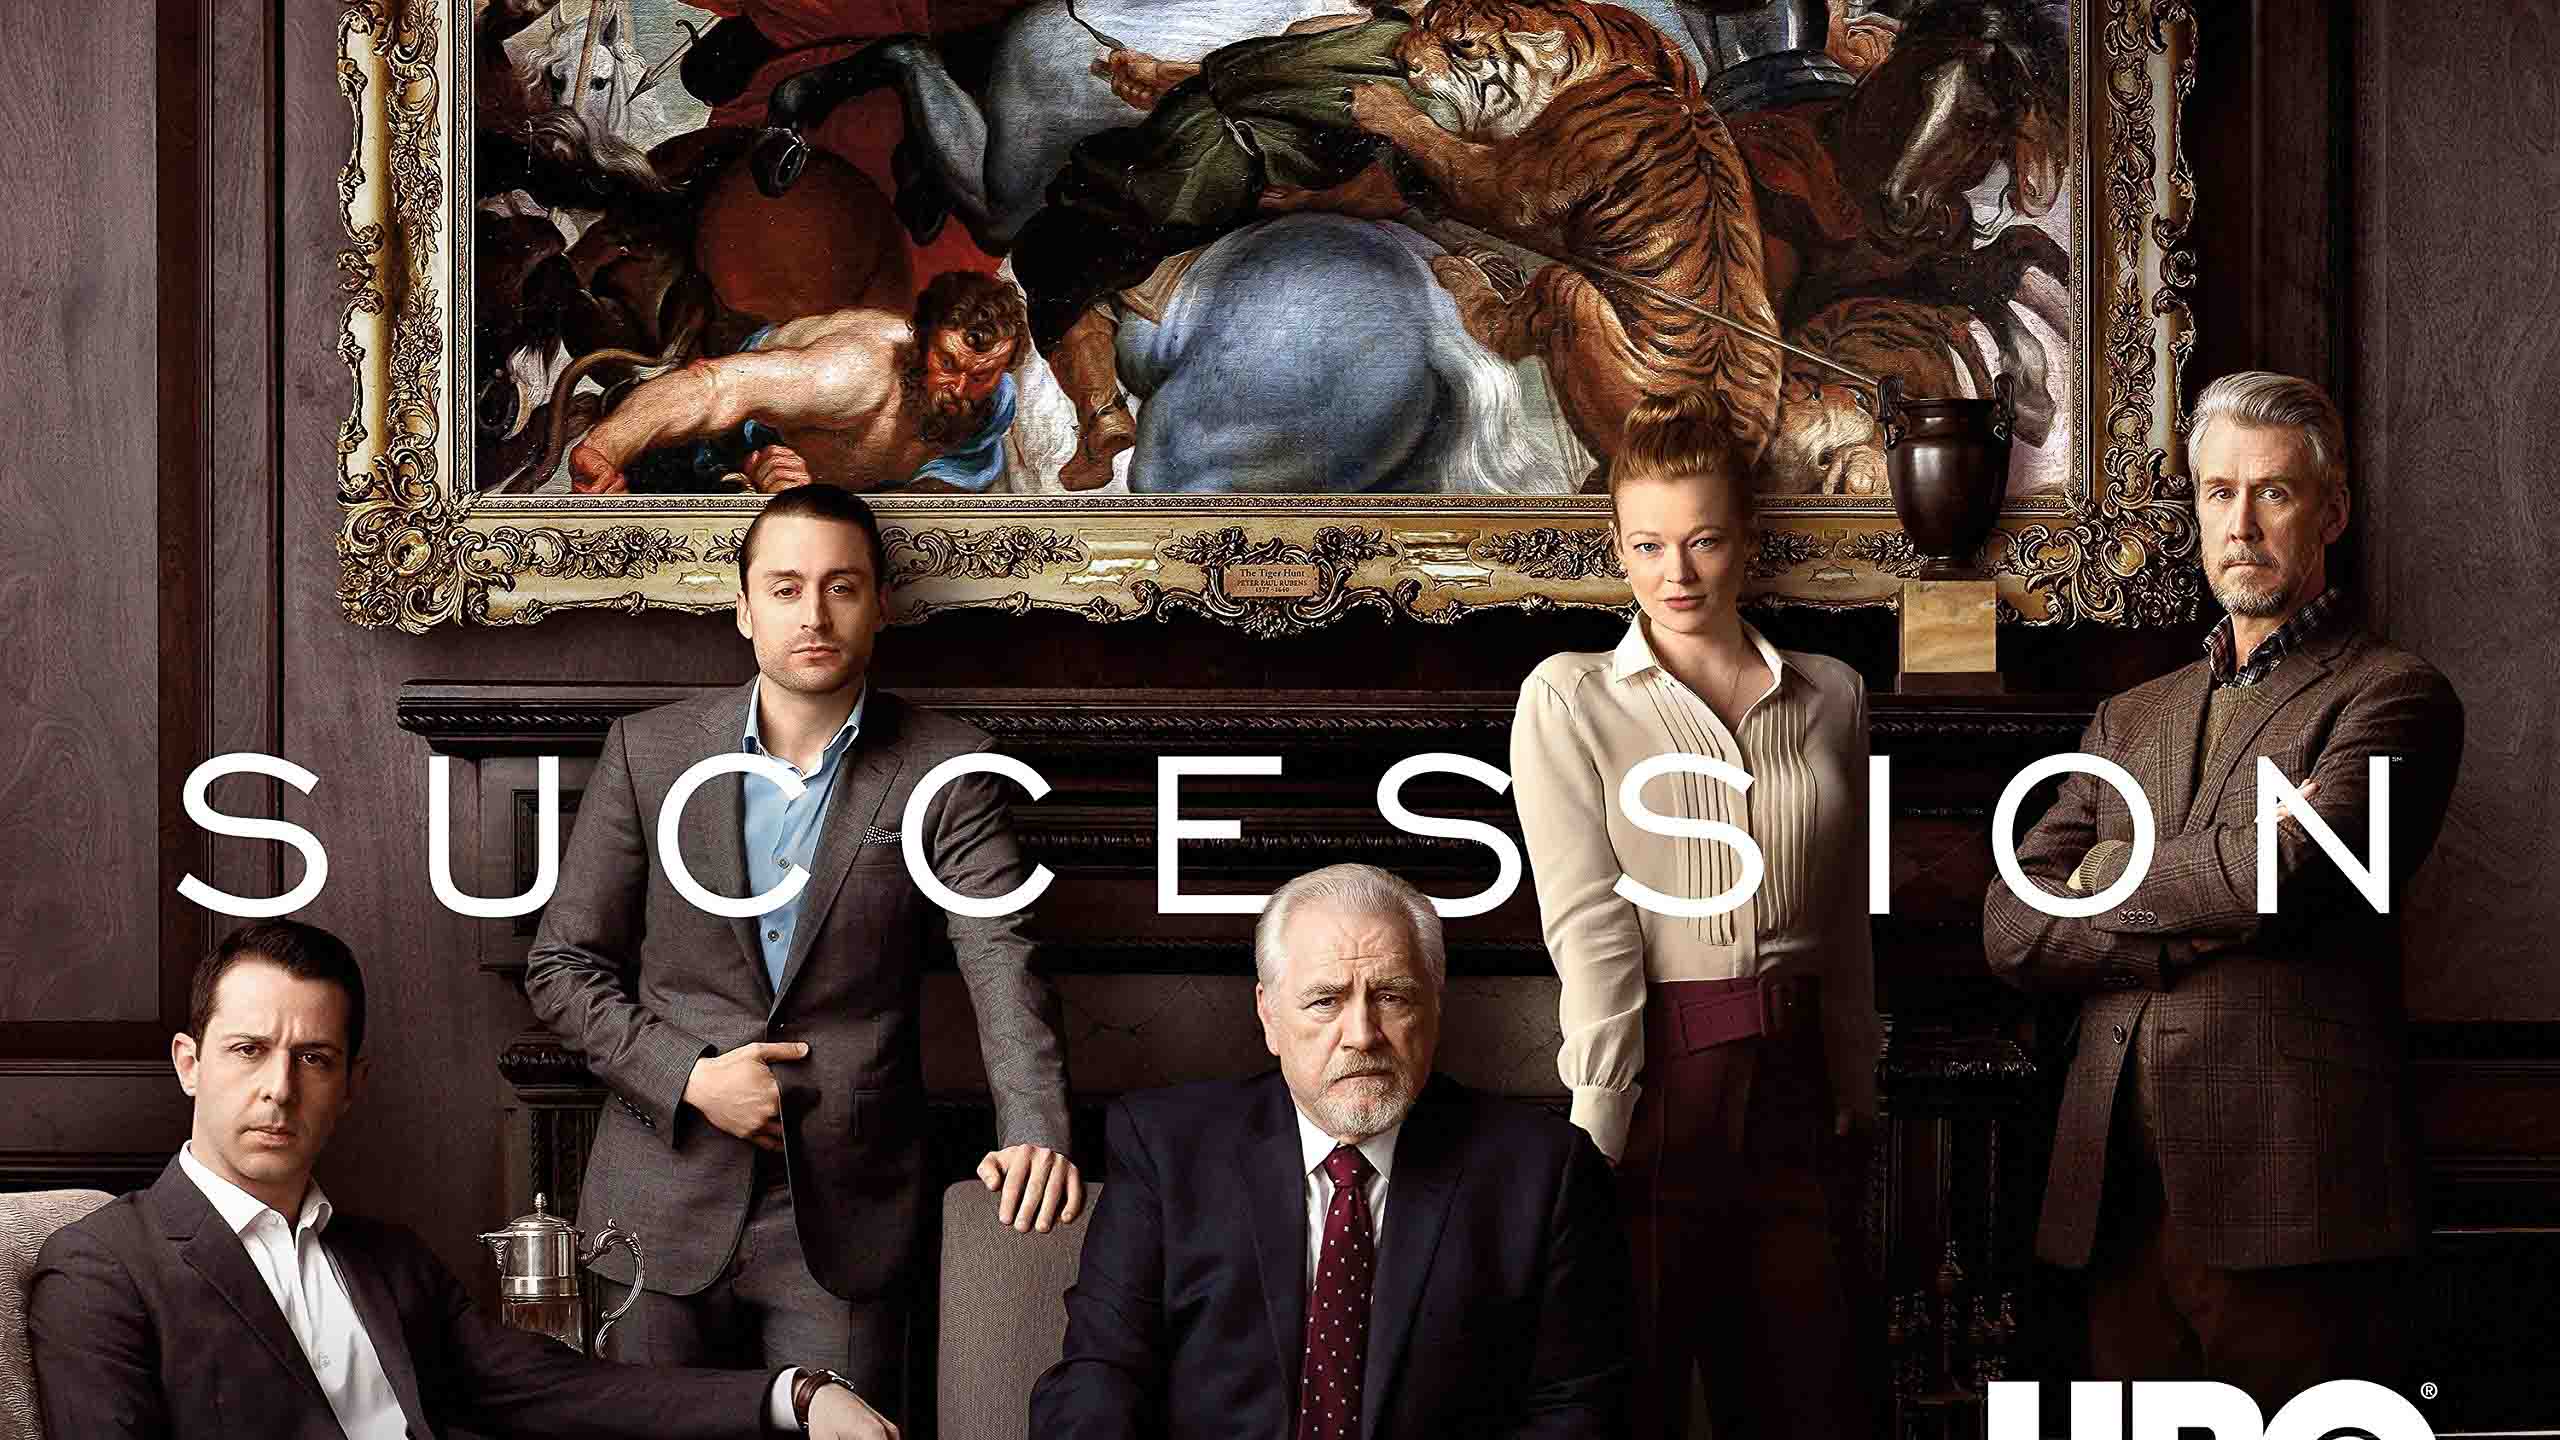 Succession is an American drama television series, created by Jesse Armstrong, that premiered on June 3, 2018, on HBO. The series centers on the ficti...